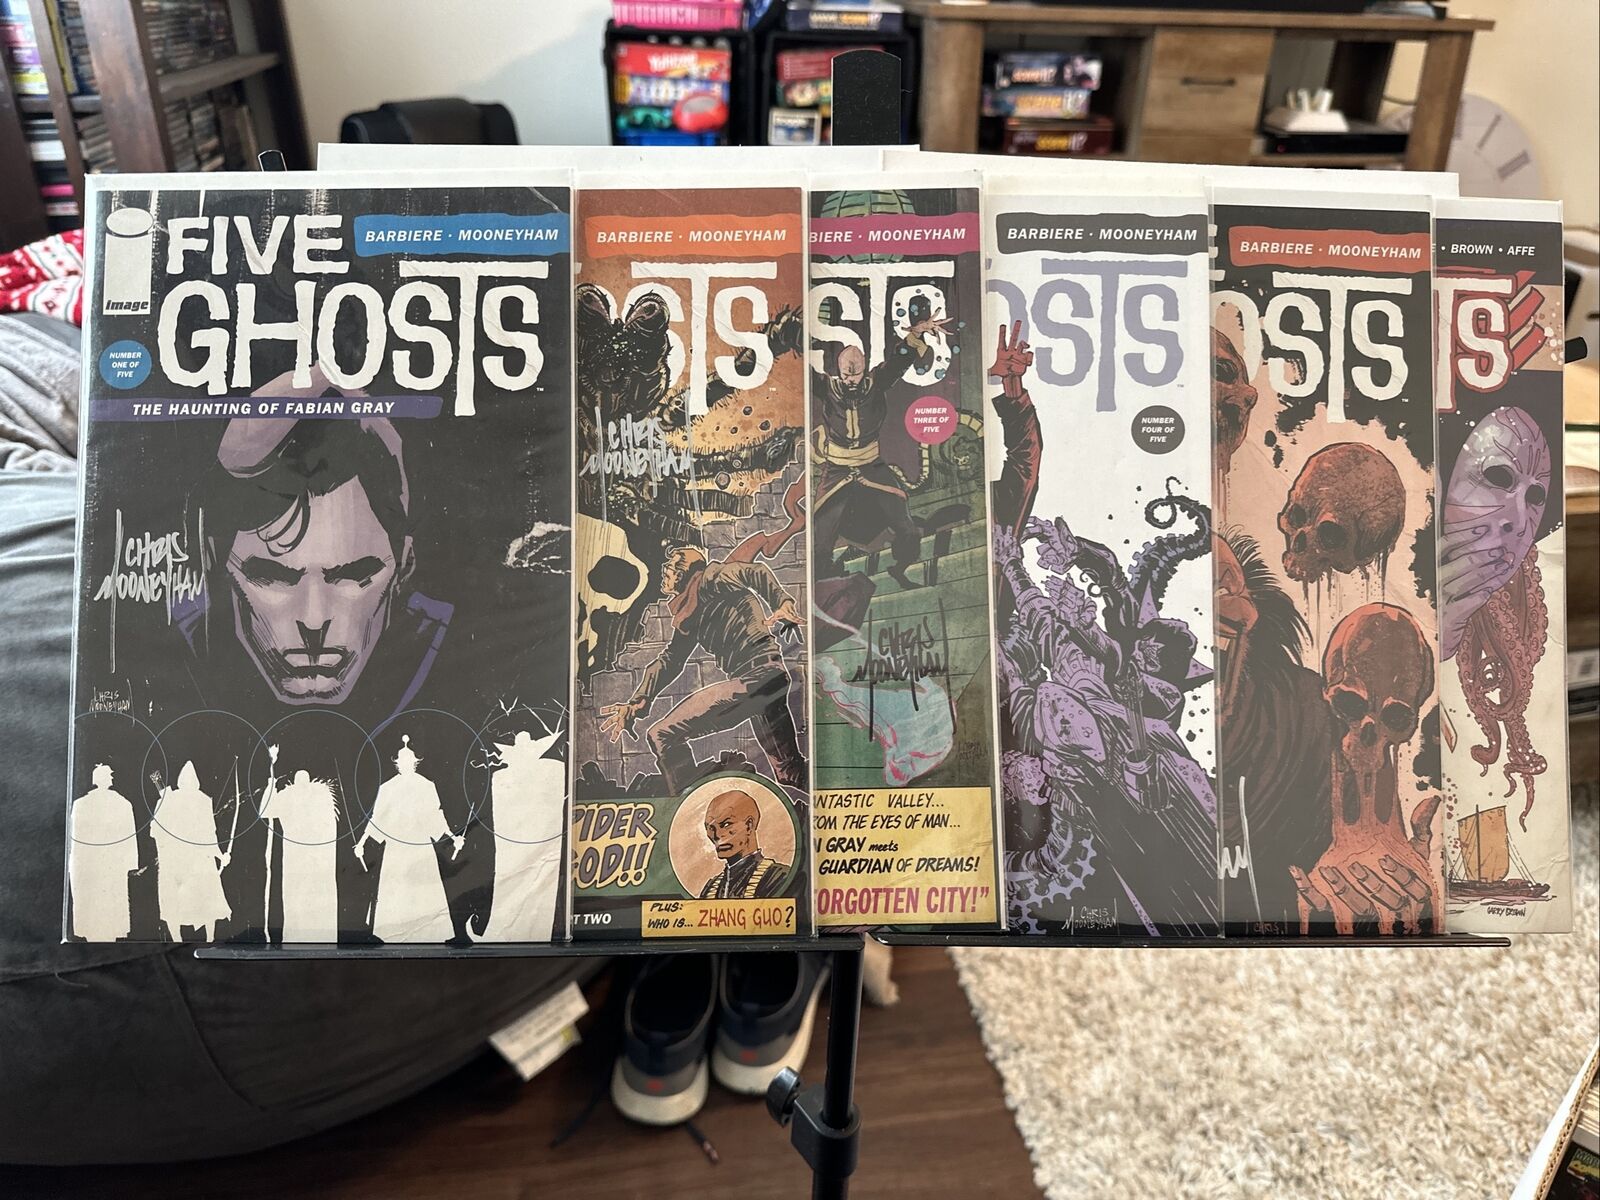 Five Ghosts #1-12 (2013) #1-5 Signed by Mooneyham (artist).